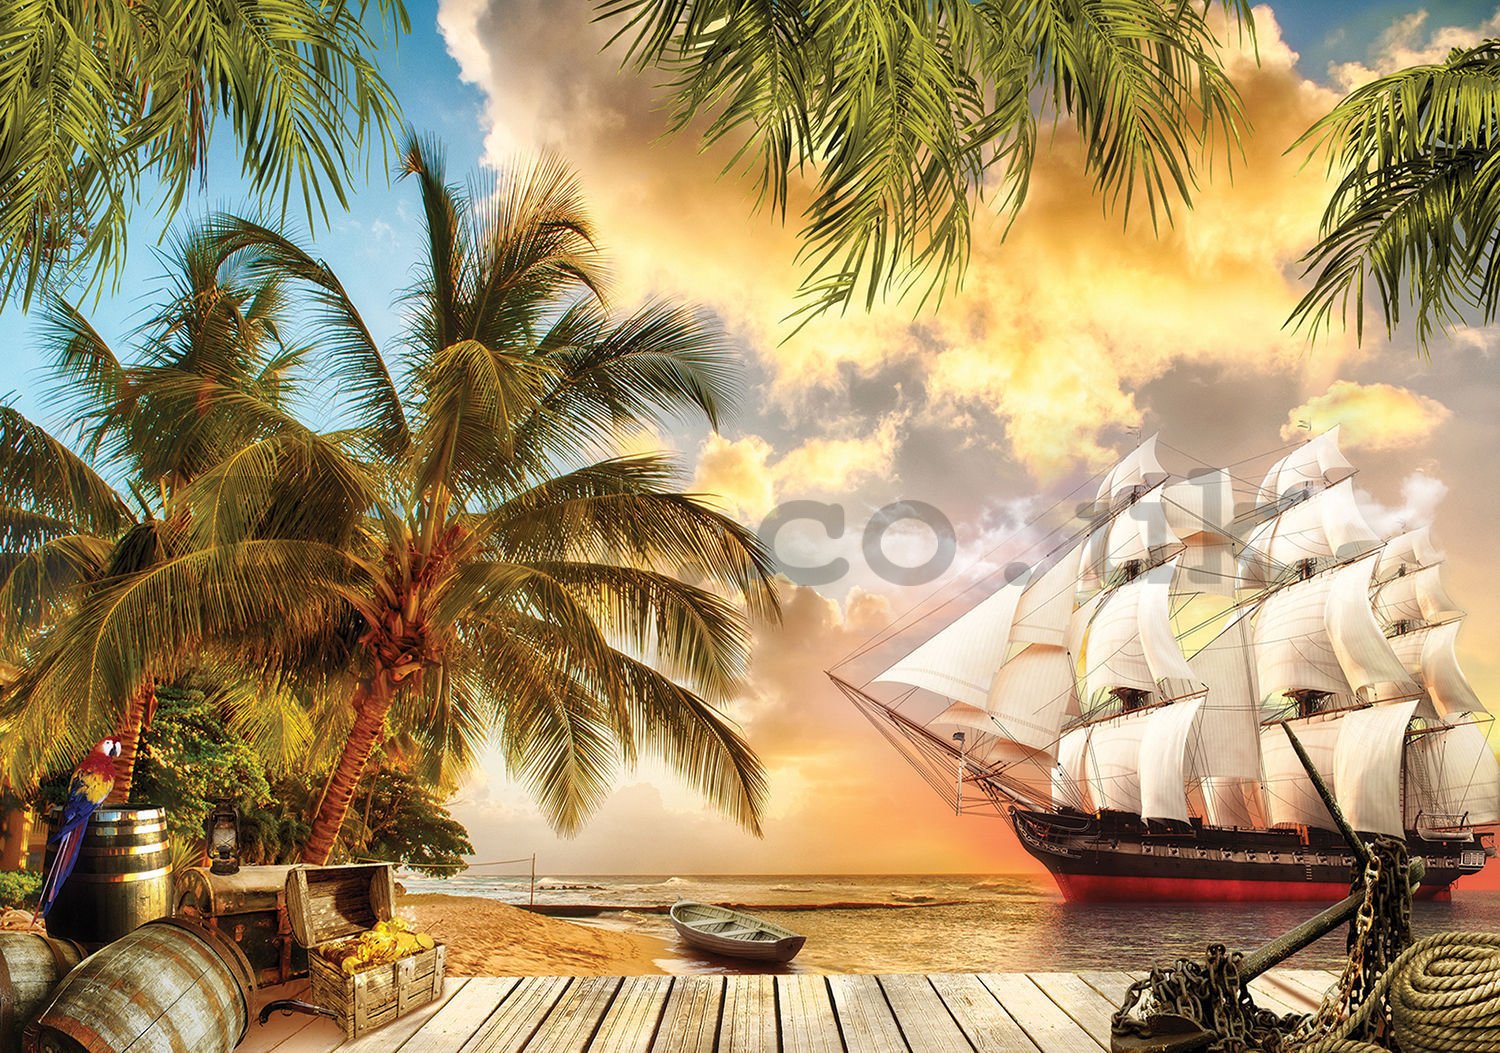 Painting on canvas: Sailboat in paradise - 75x100 cm